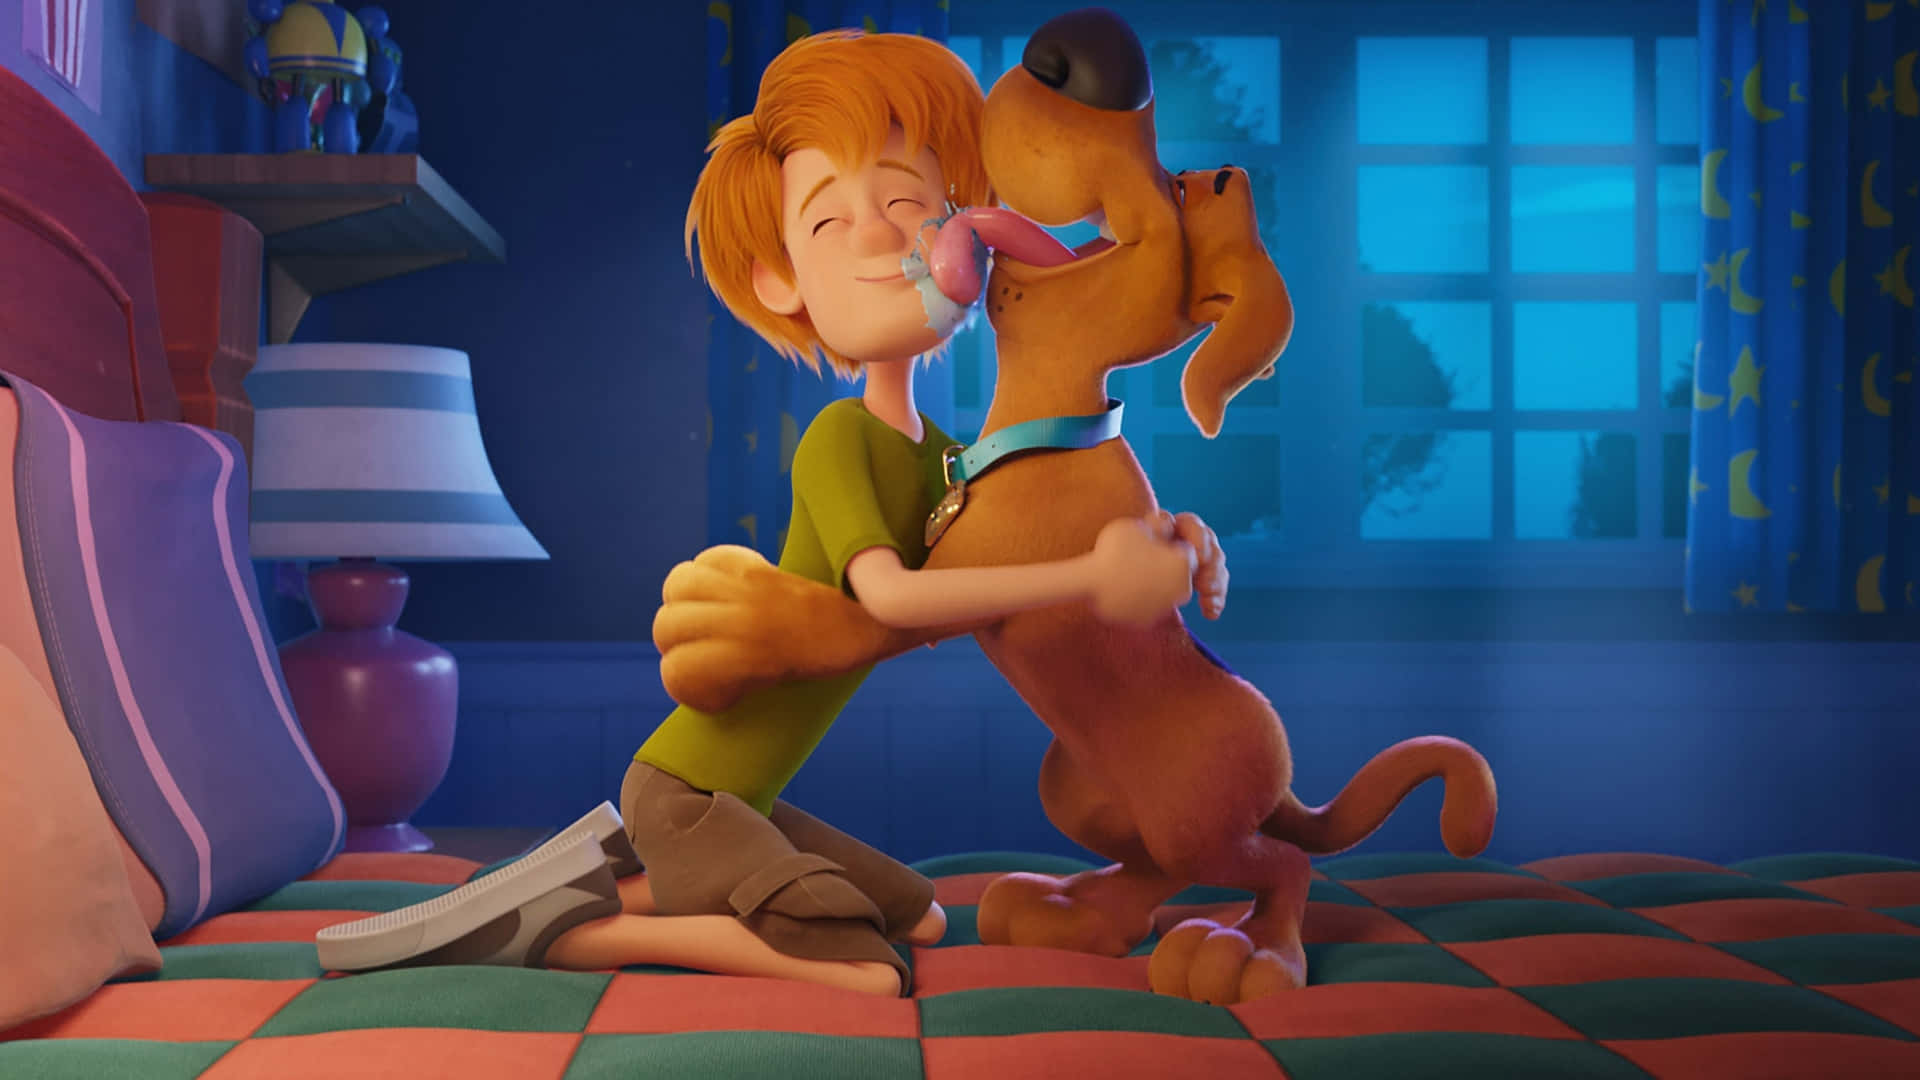 Join Shaggy Rogers and his best pal, Scooby Doo, on their elaborate mystery adventures! Wallpaper